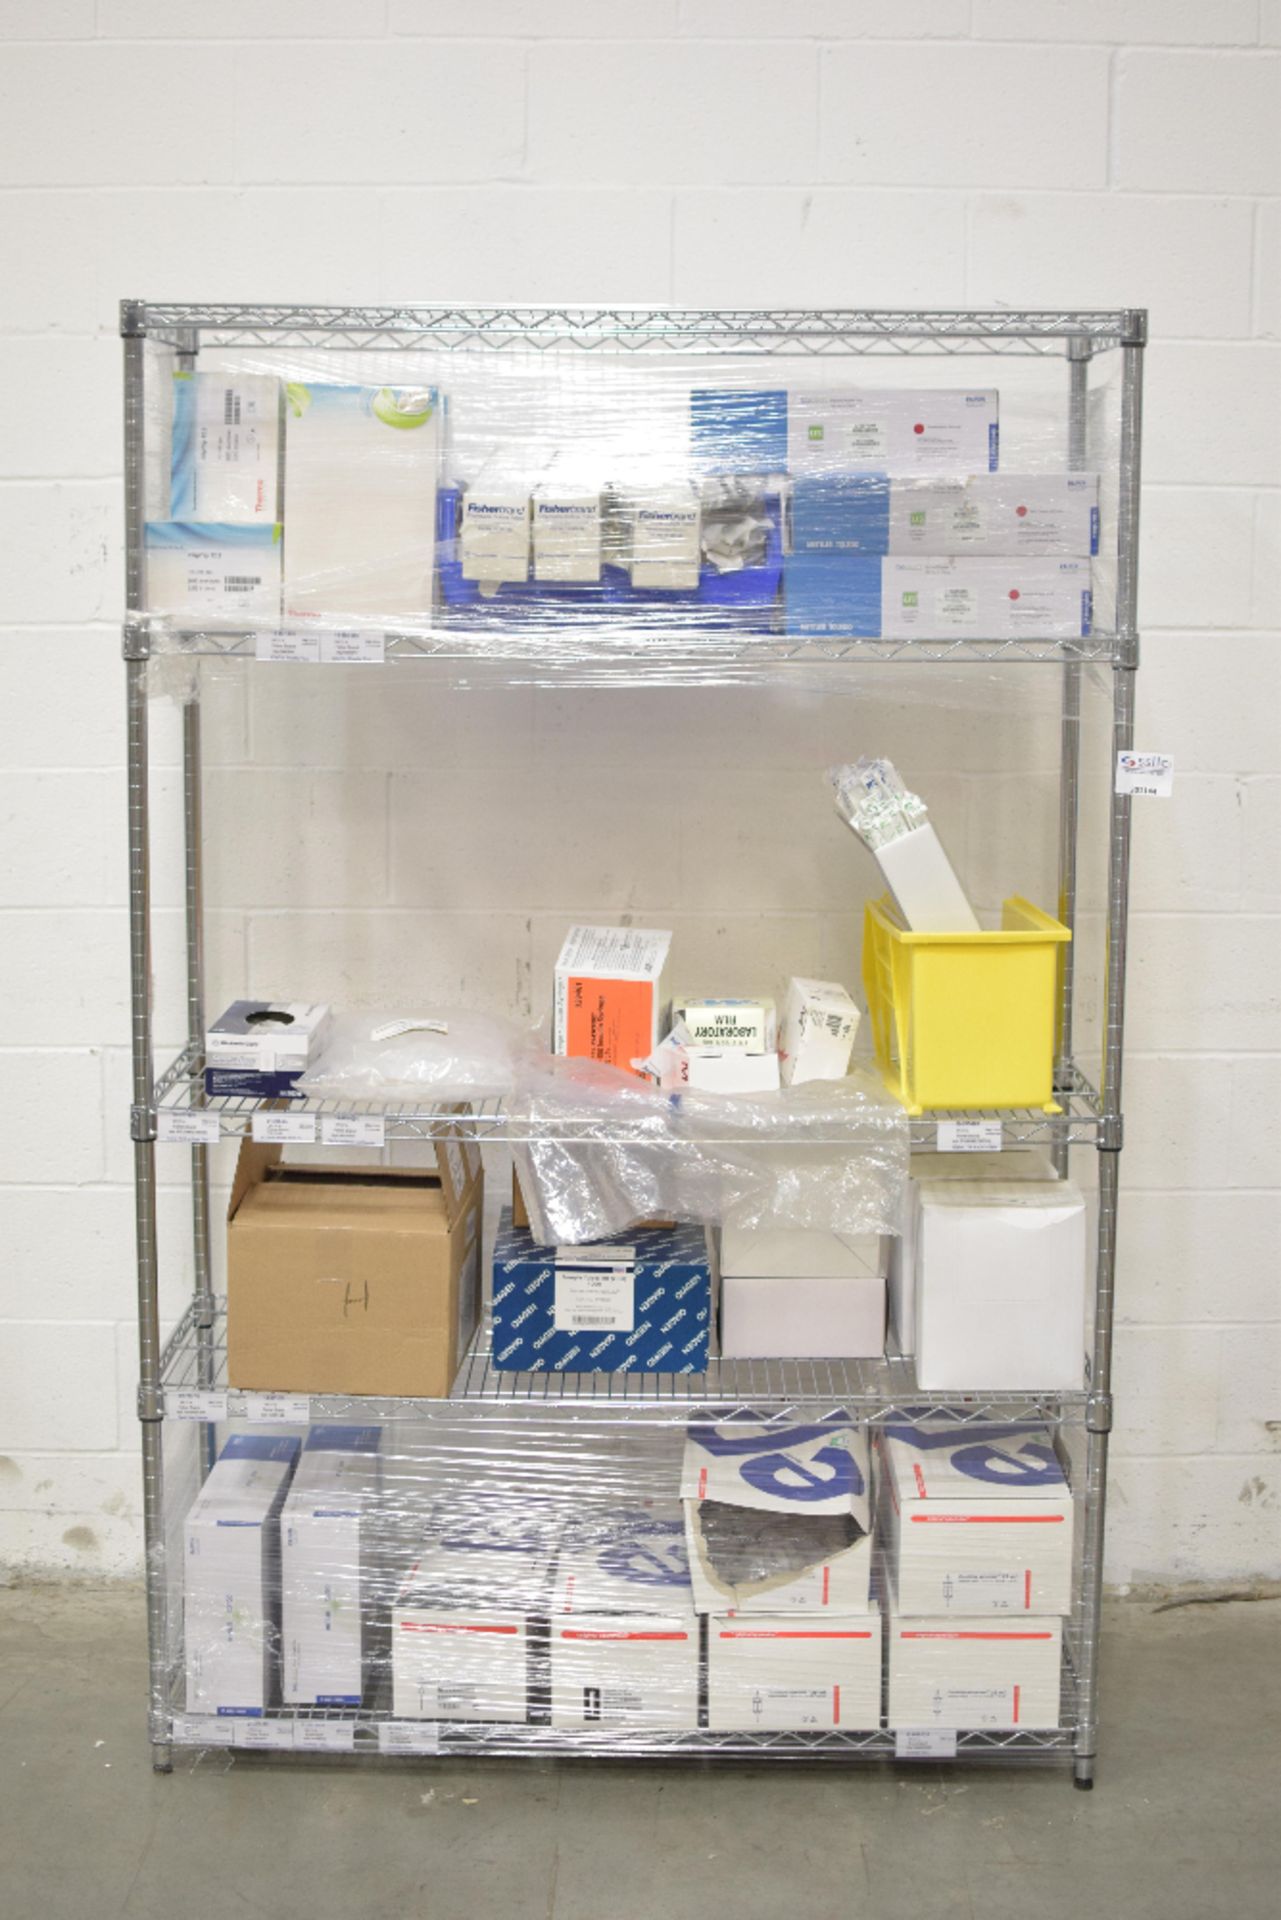 Lot of Lab Consumables with Metro Rack